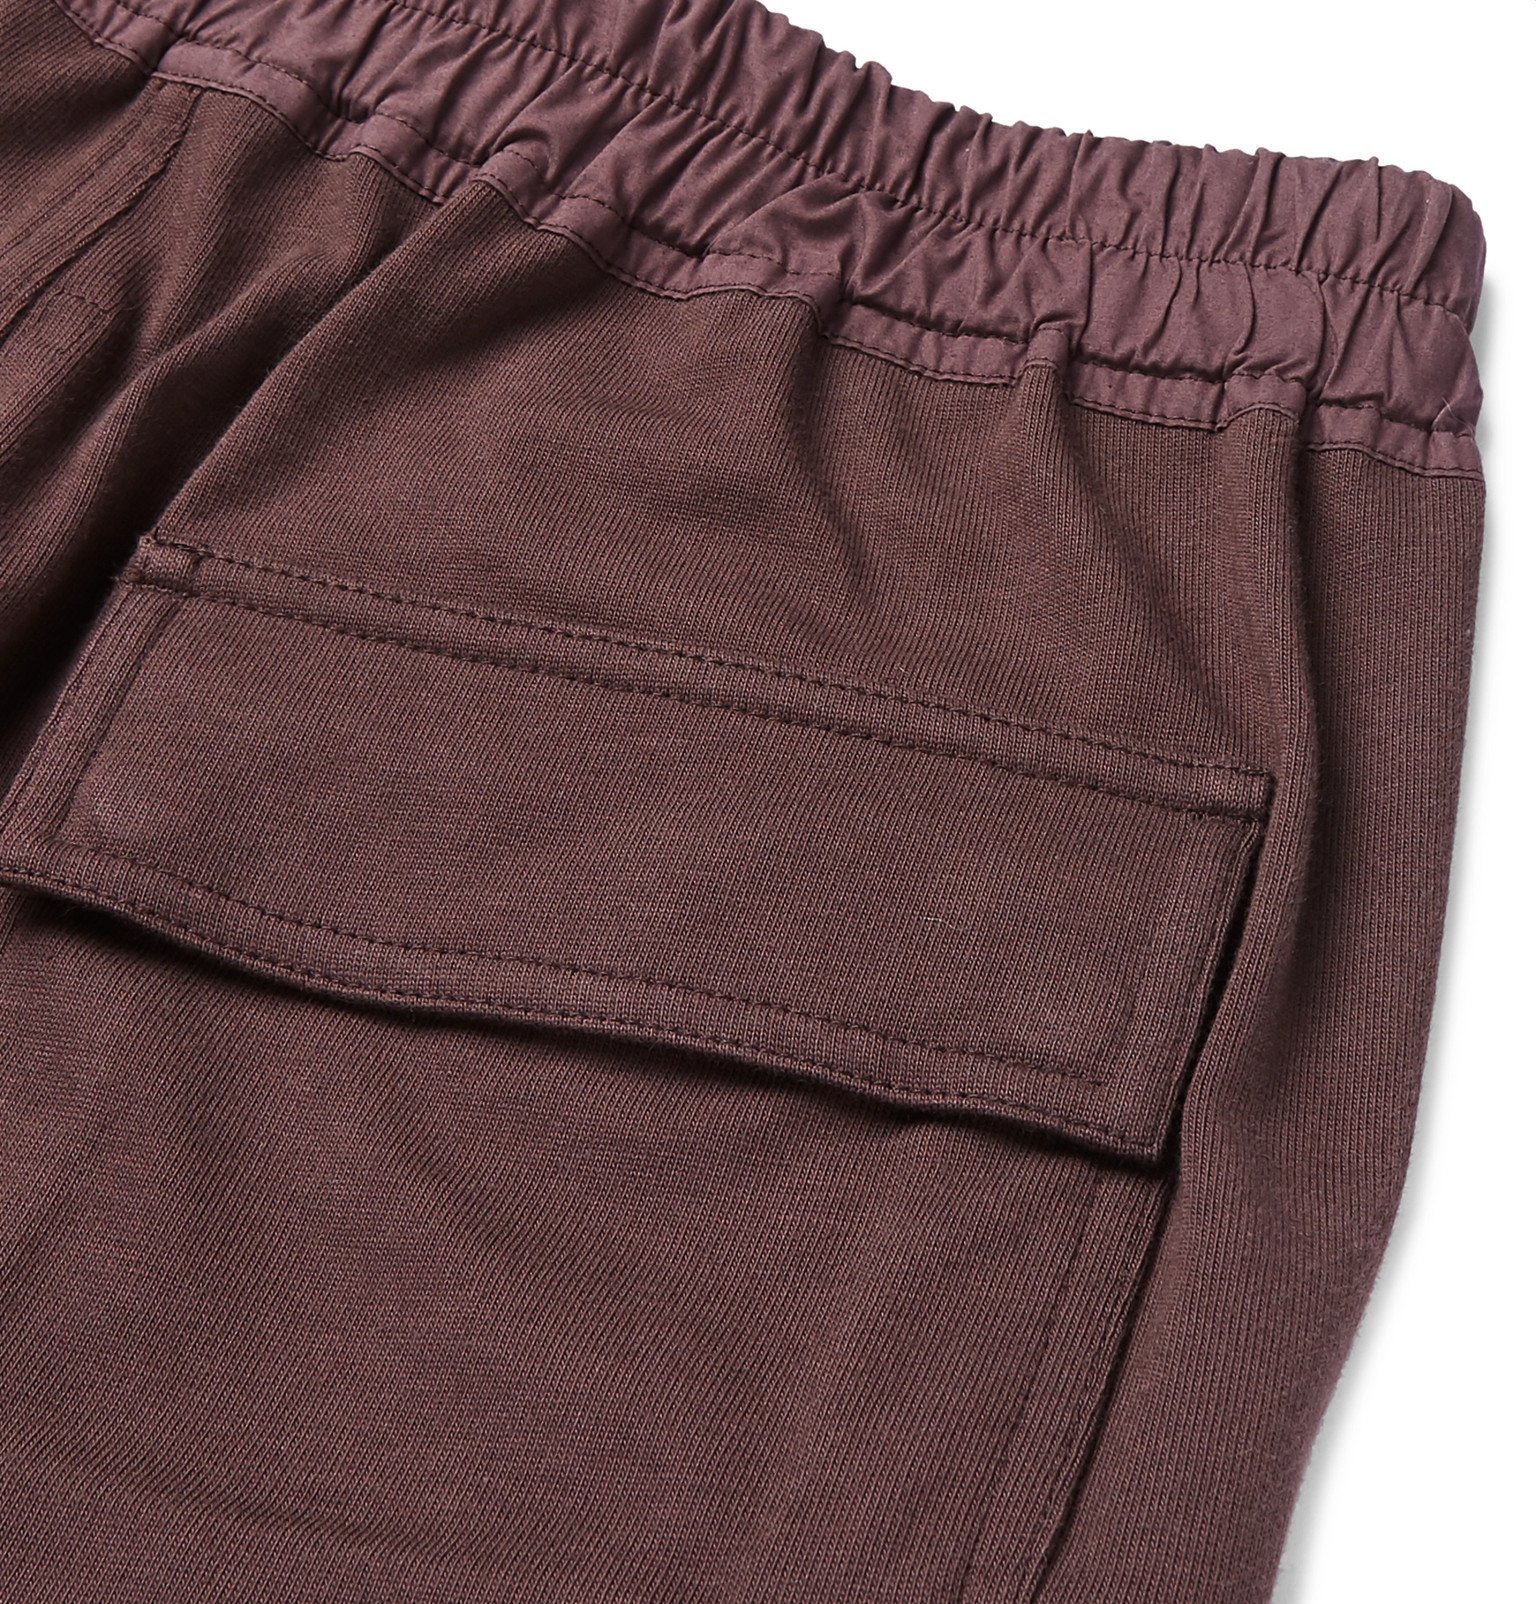 Rick Owens - Slim-Fit Tapered Cotton-Jersey Track Pants - Burgundy 